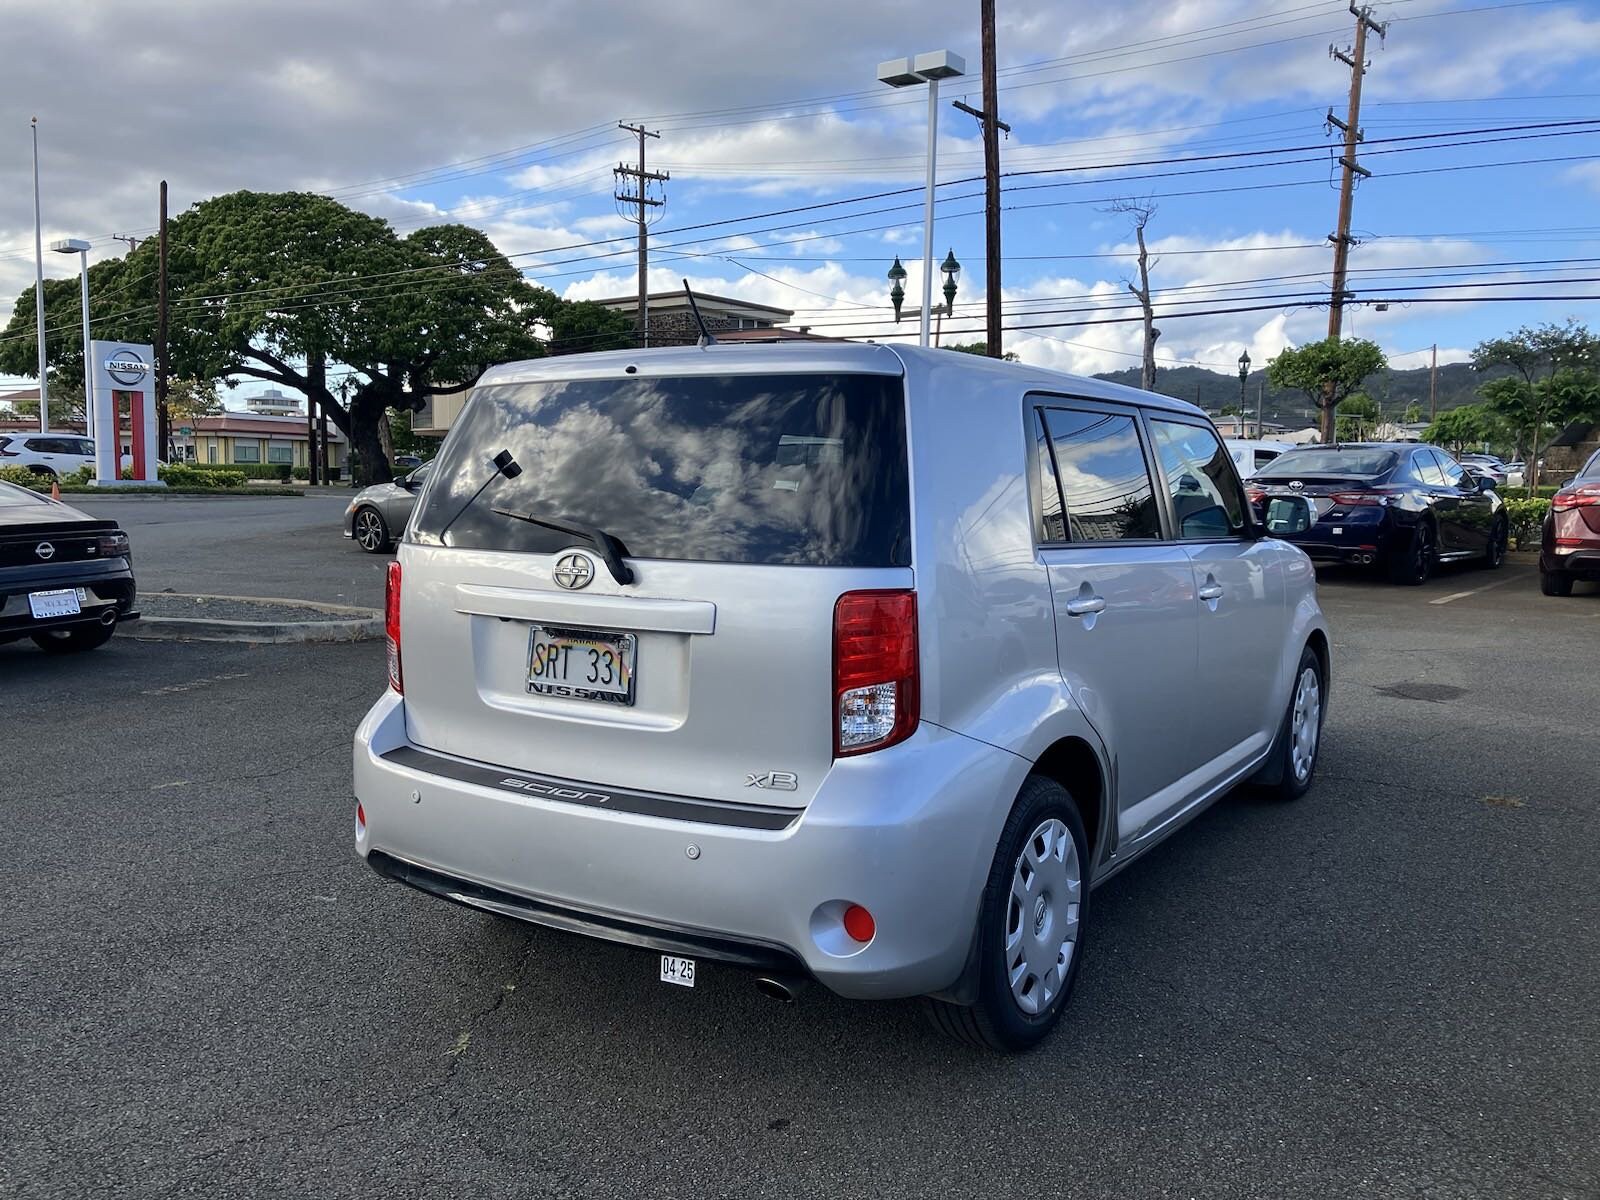 Used 2015 Scion xB For Sale at New City Nissan | VIN 